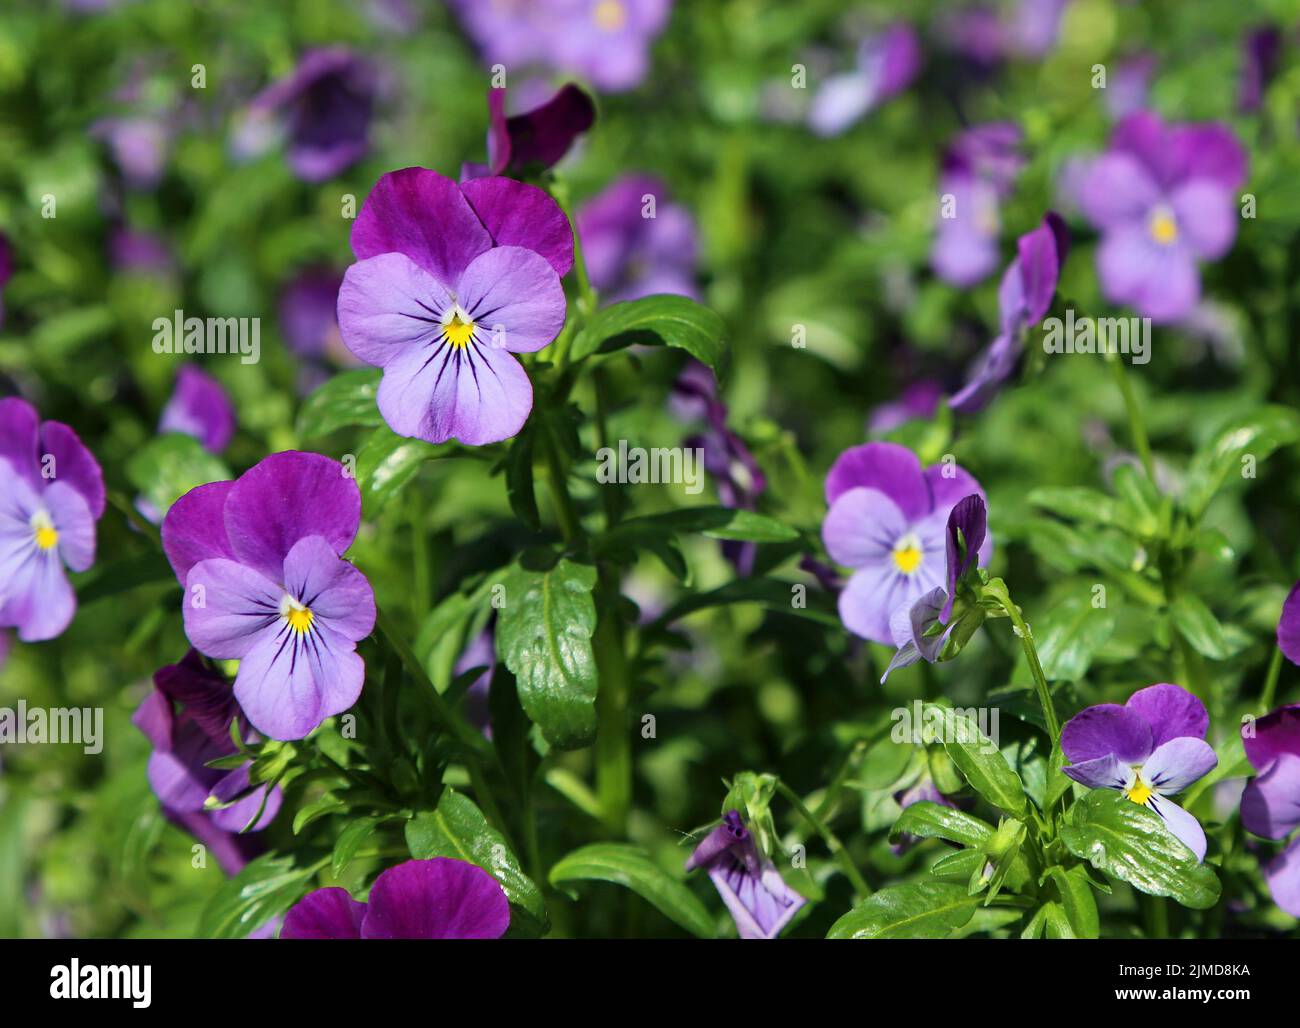 Violet Pansy flowers Stock Photo